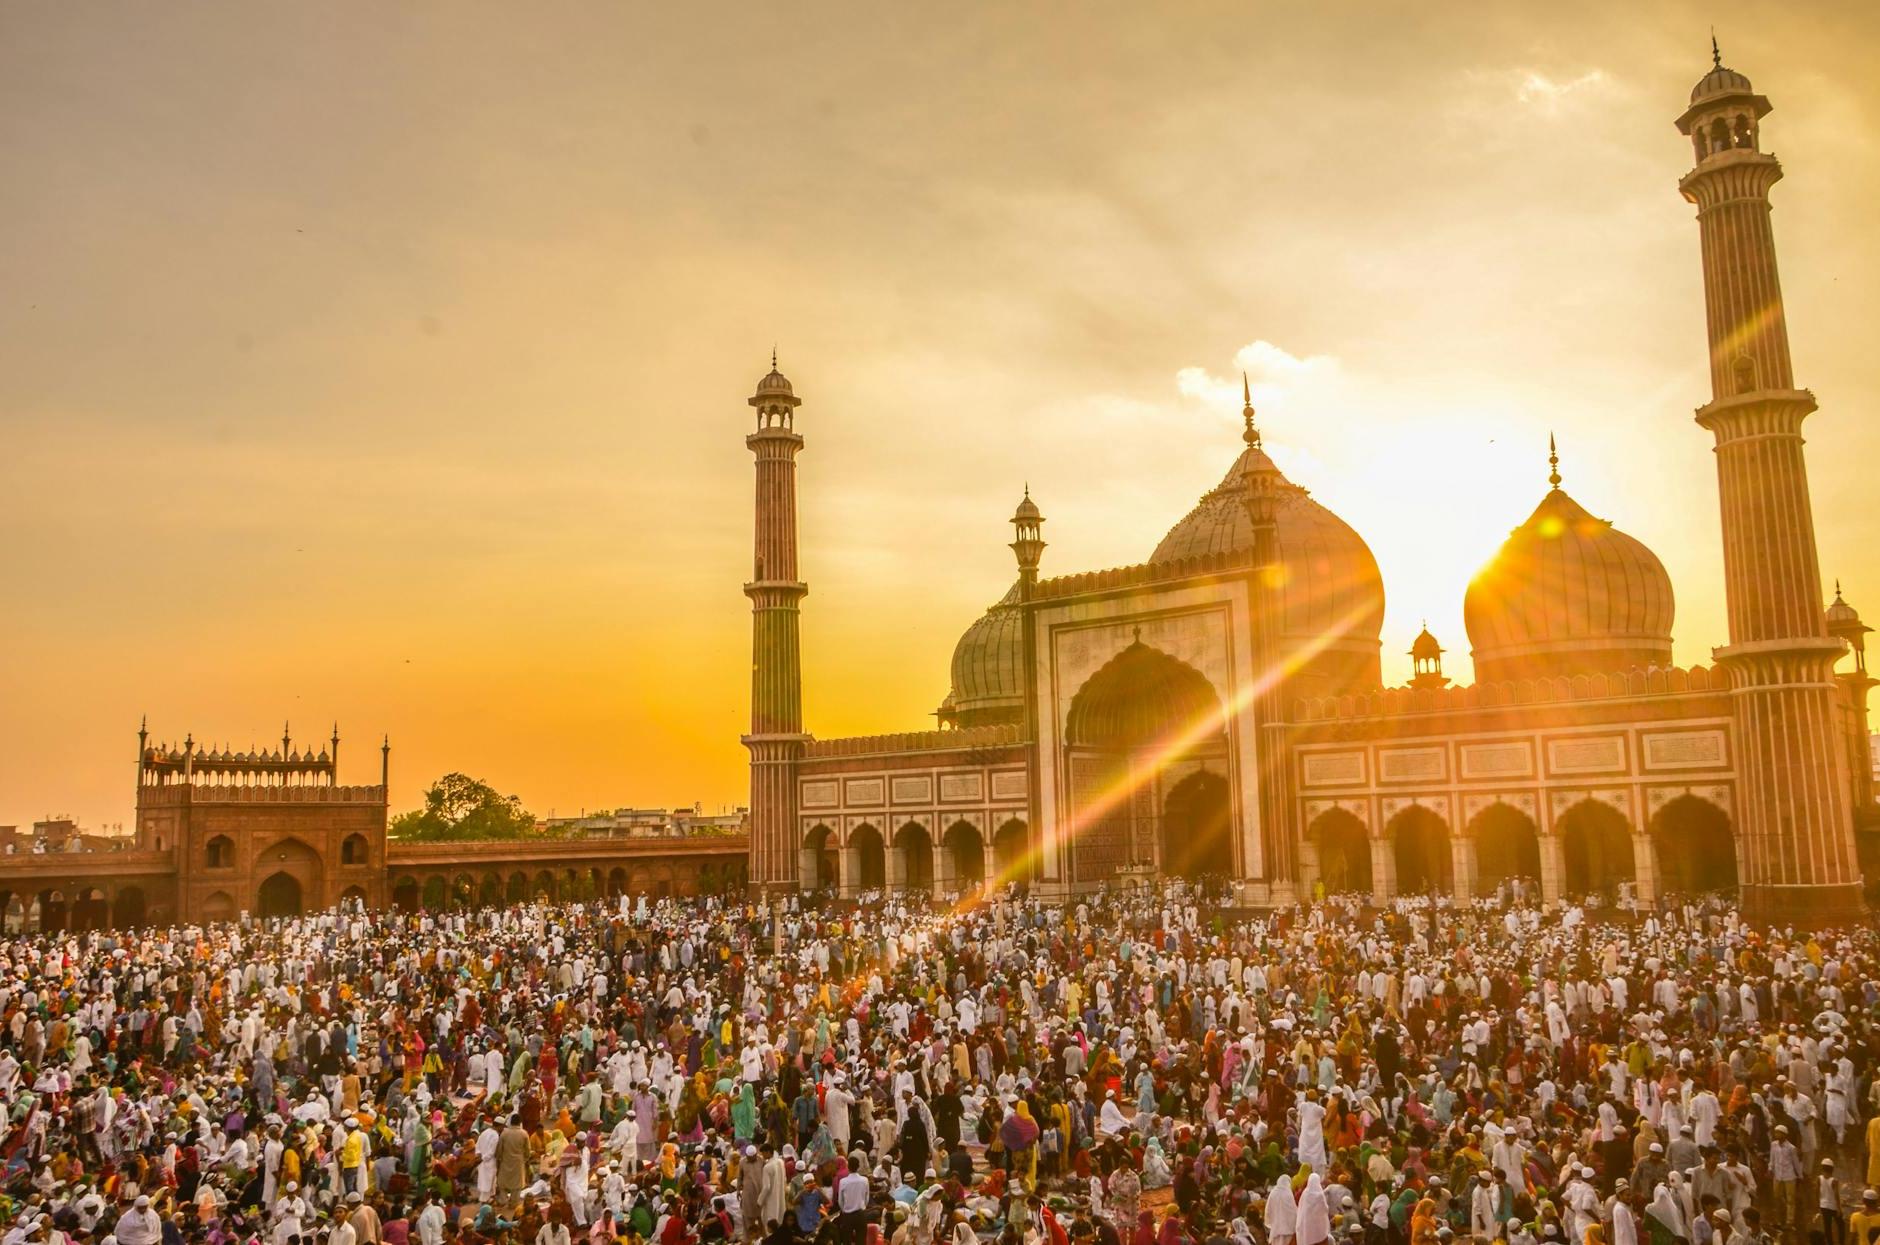 Photo Of People In Front Of Mosque During Golden Hour